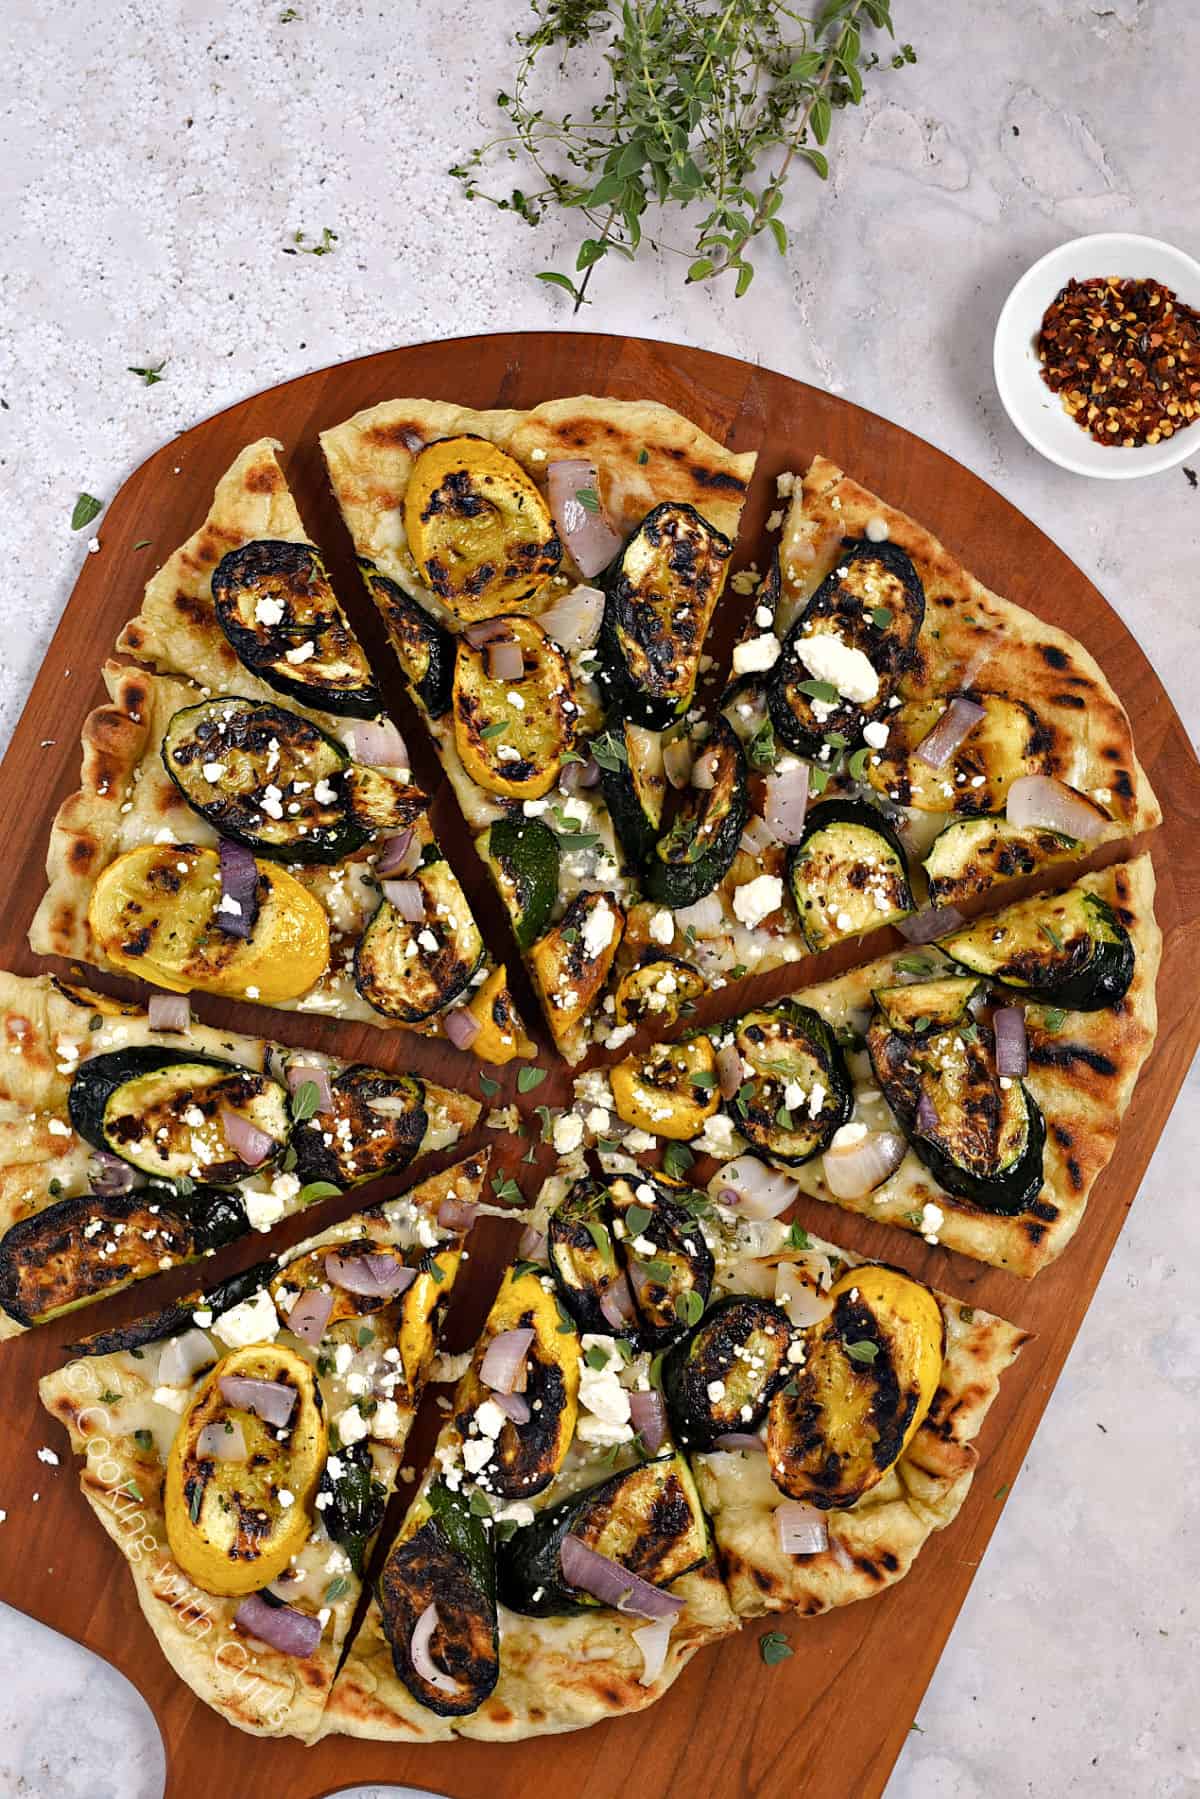 Looking down on a grilled pizza topped with summer squash, red onion, cheese and fresh herbs on a pizza peel.